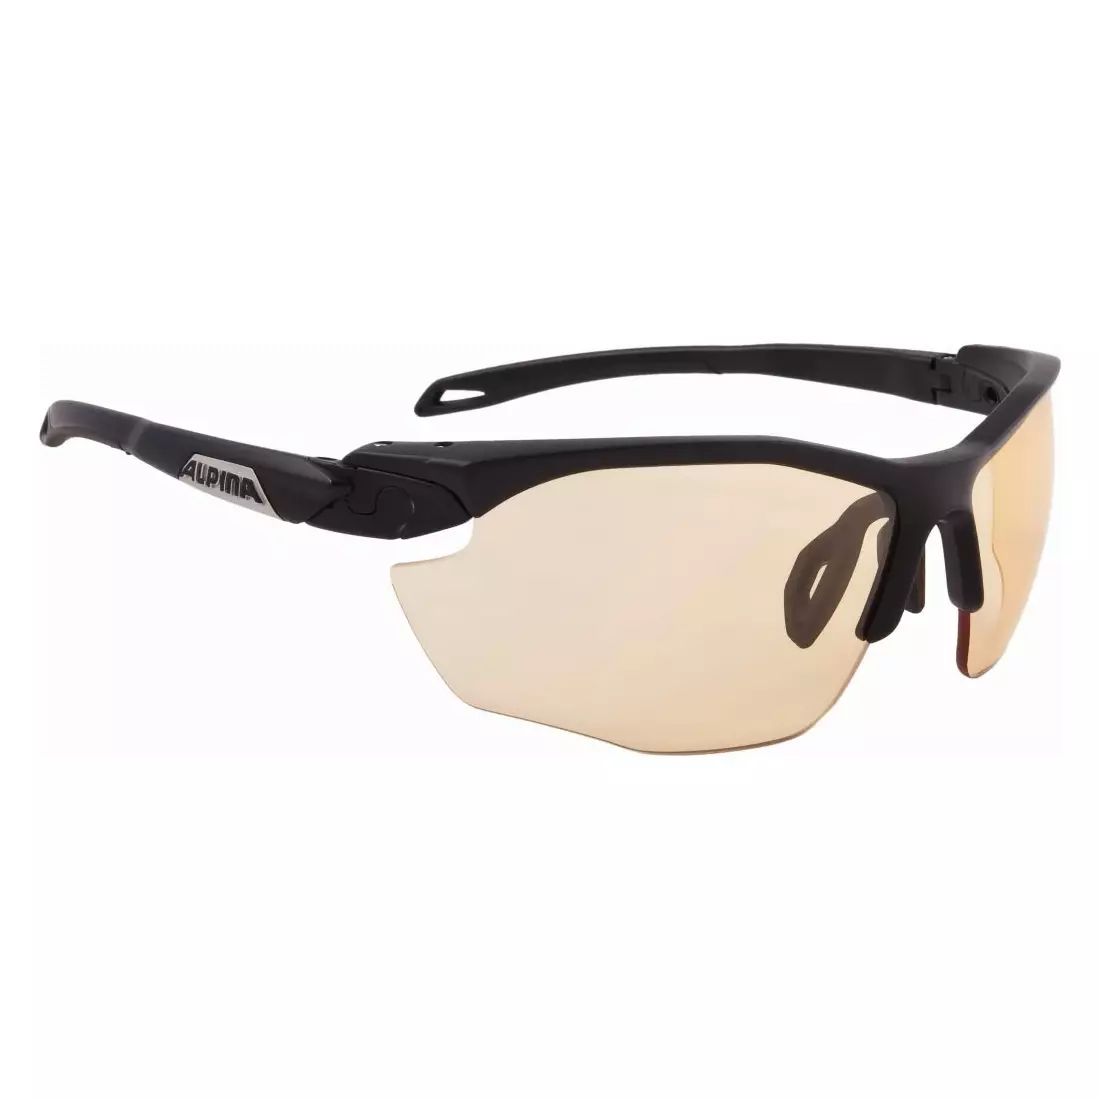 ALPINA photochromy cycling glasses from S1-S3, fogstop TWIST FIVE HR VL+